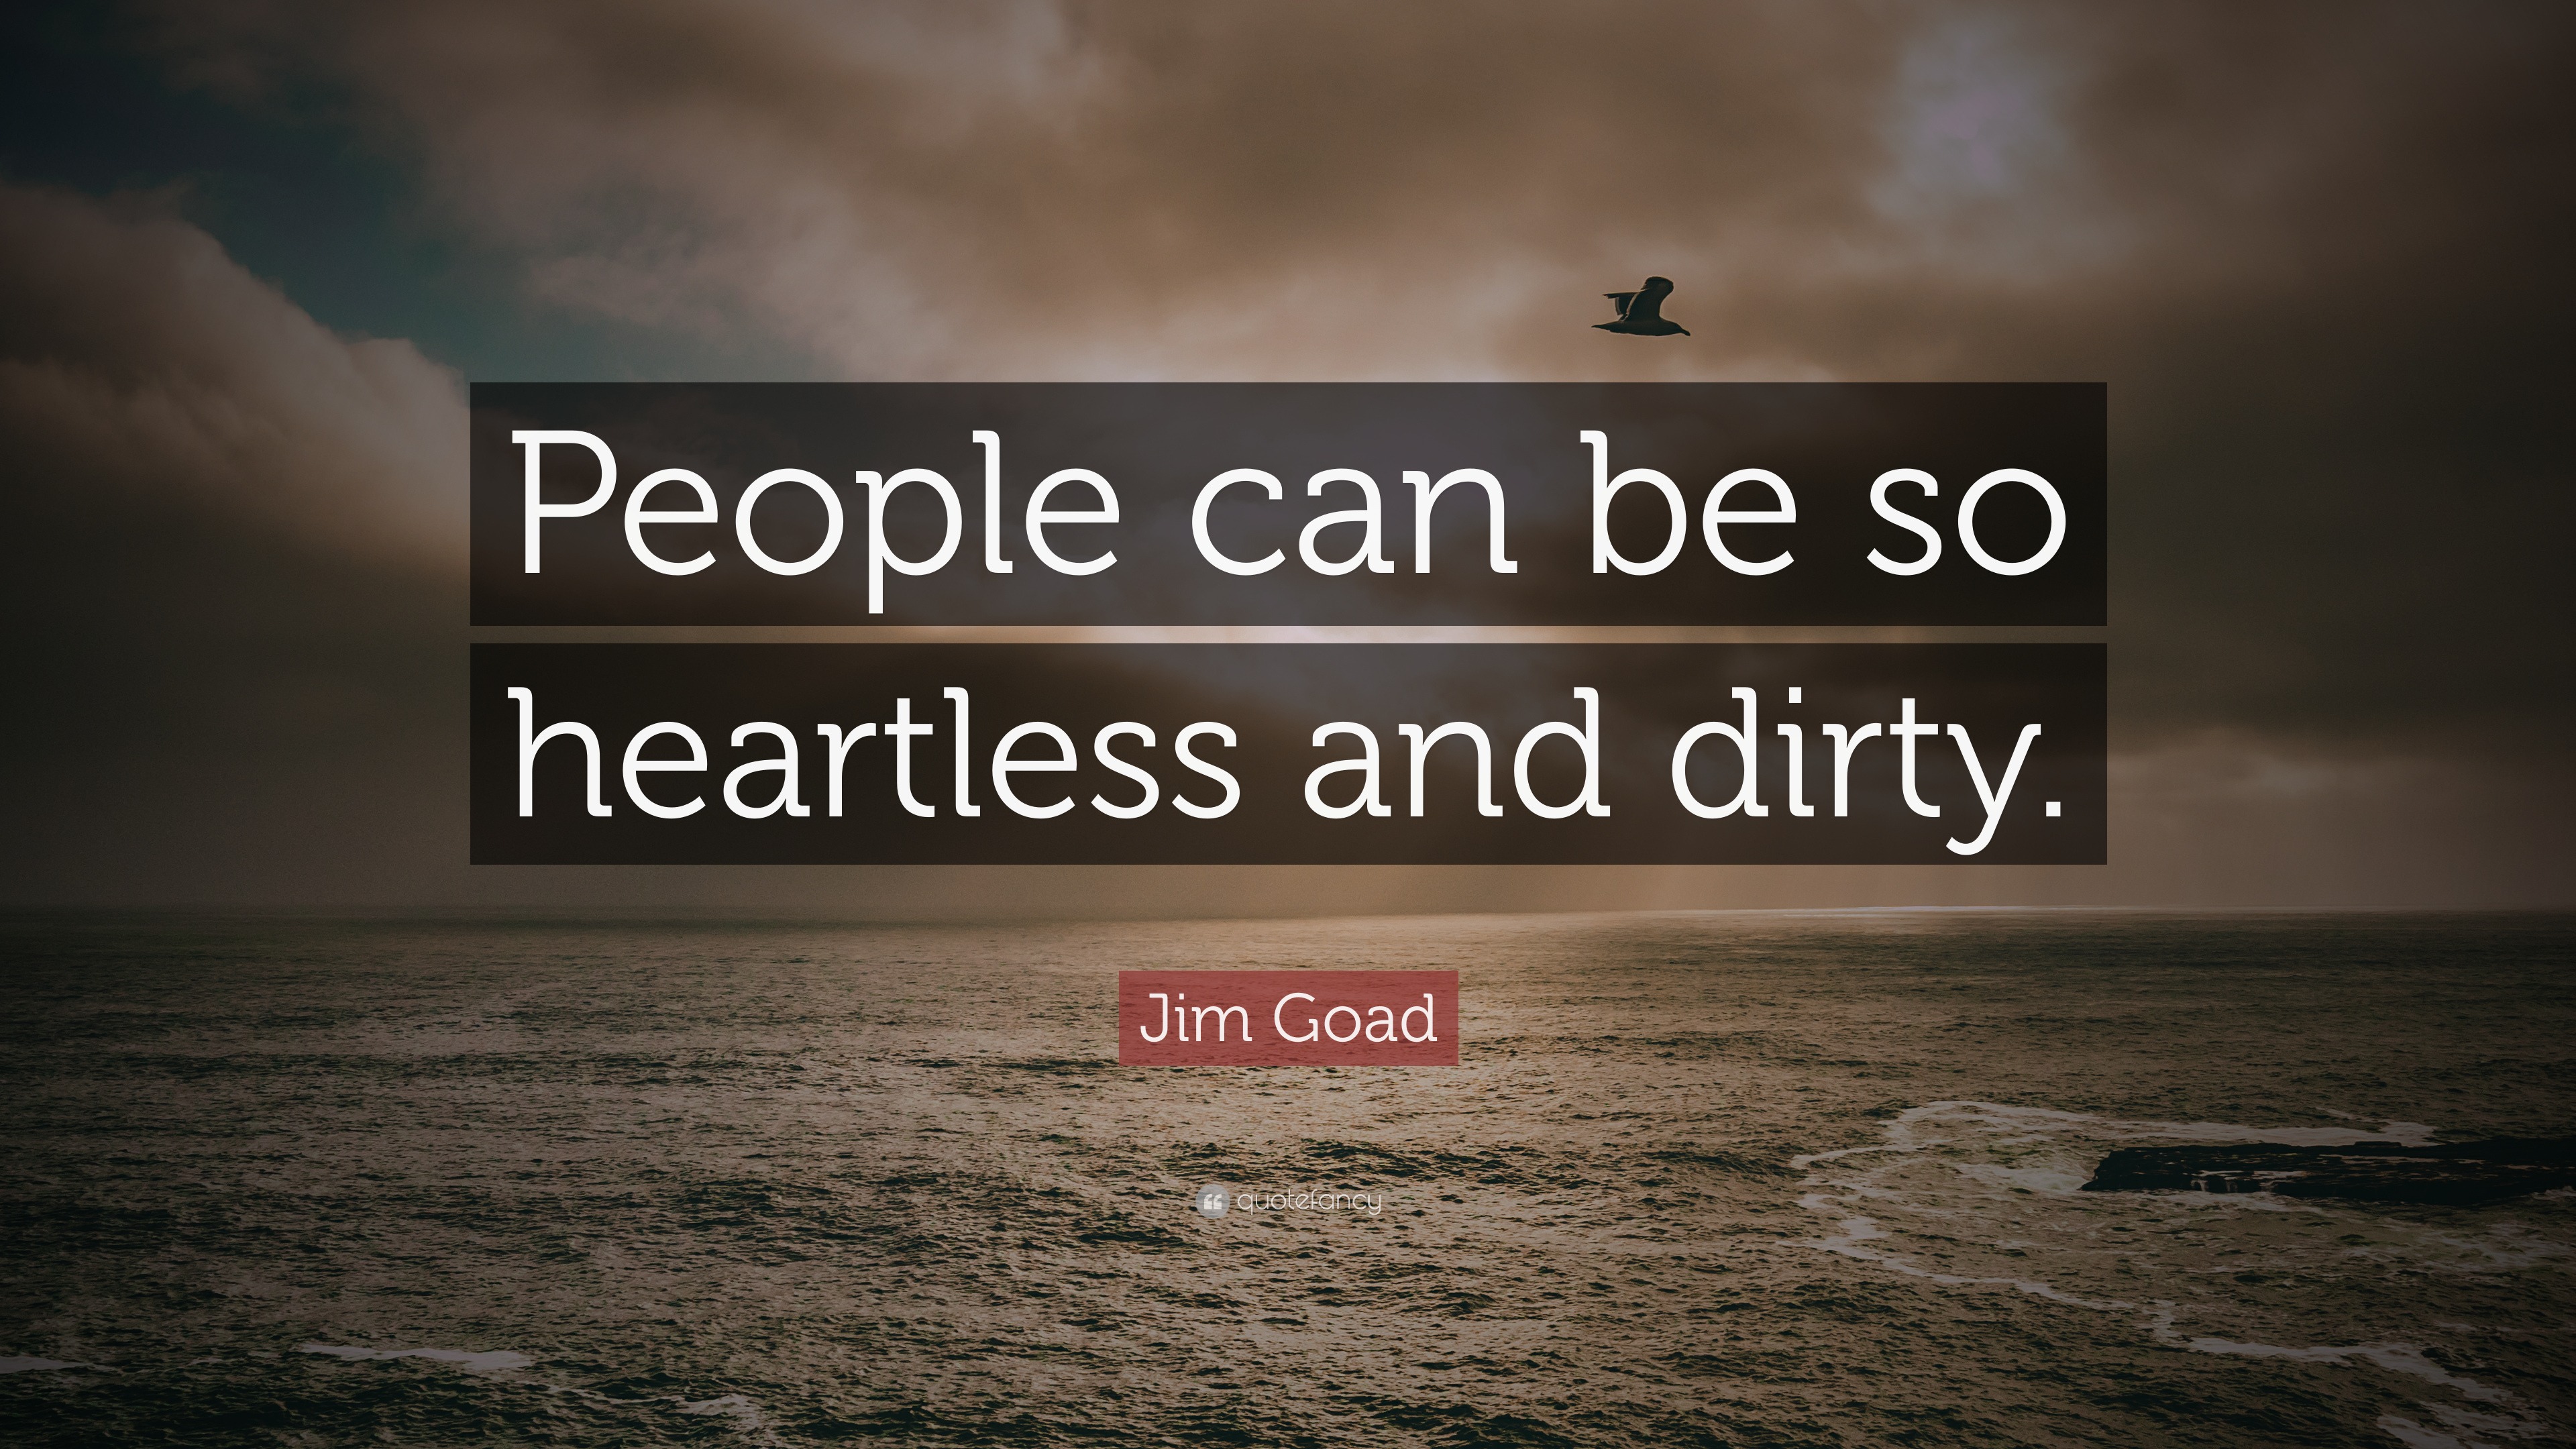 Jim Goad Quote: "People can be so heartless and dirty ...